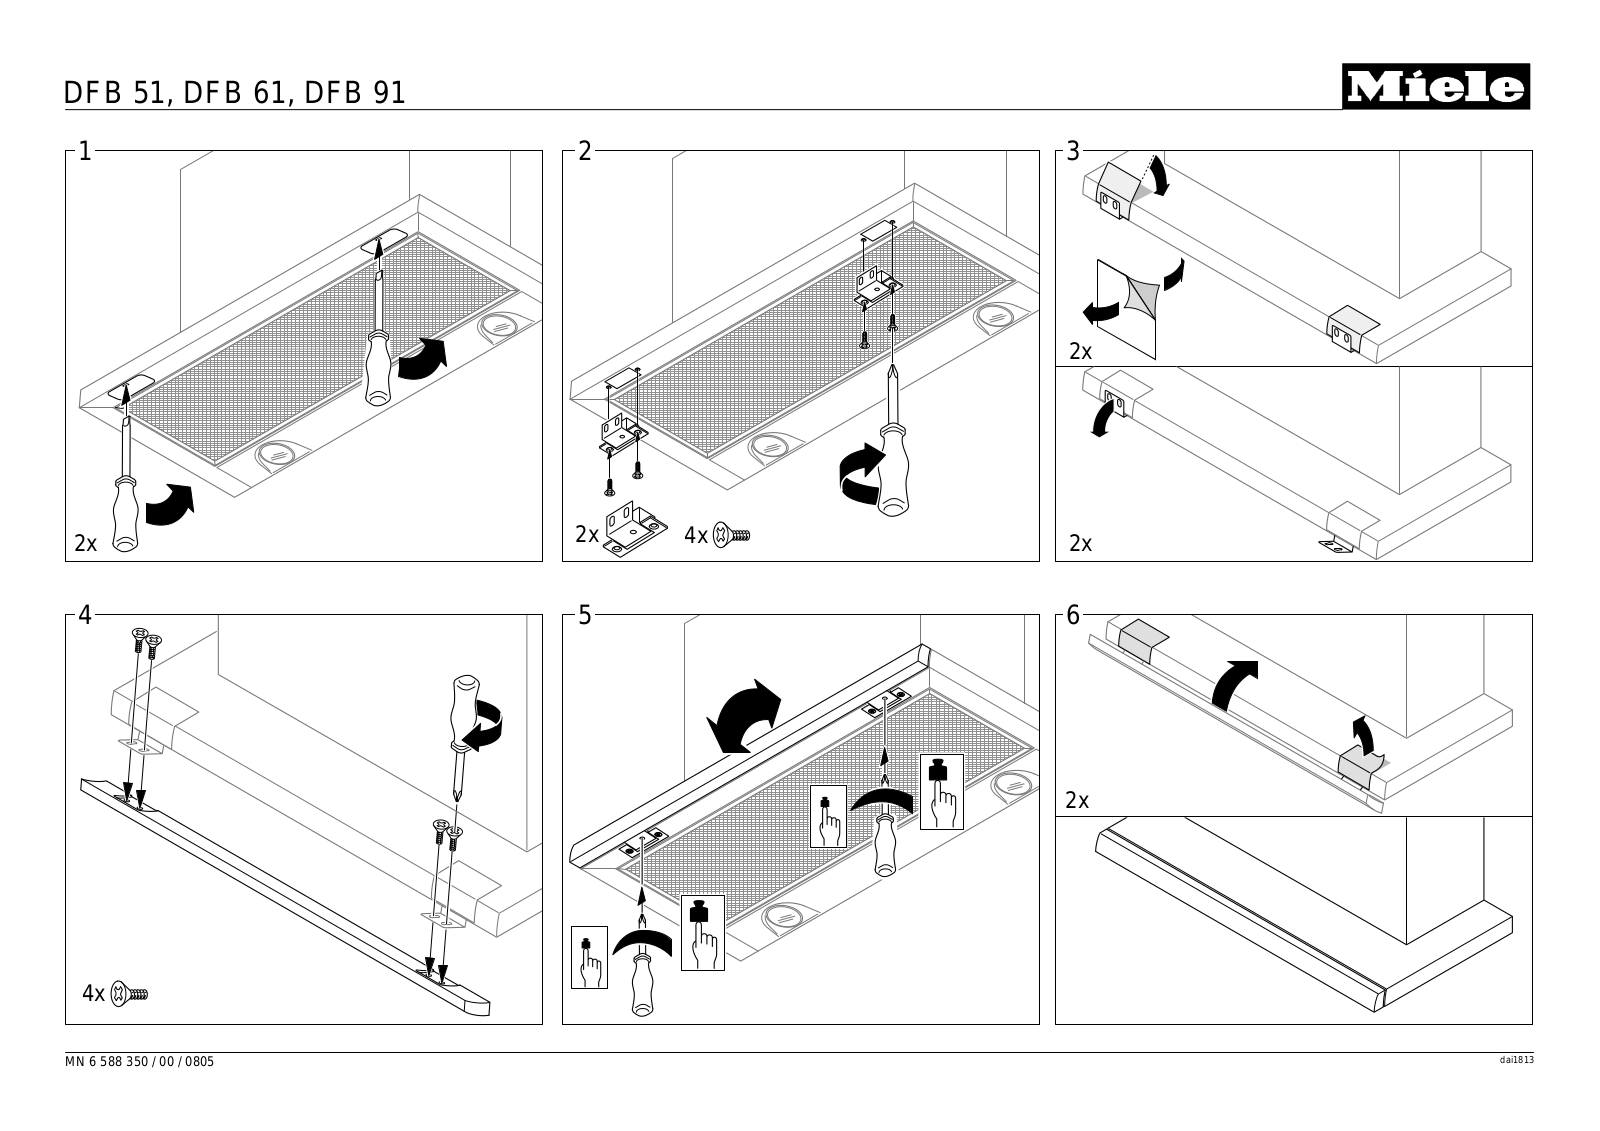 Miele DFB 51, DFB 61, DFB 91 assembly instruction